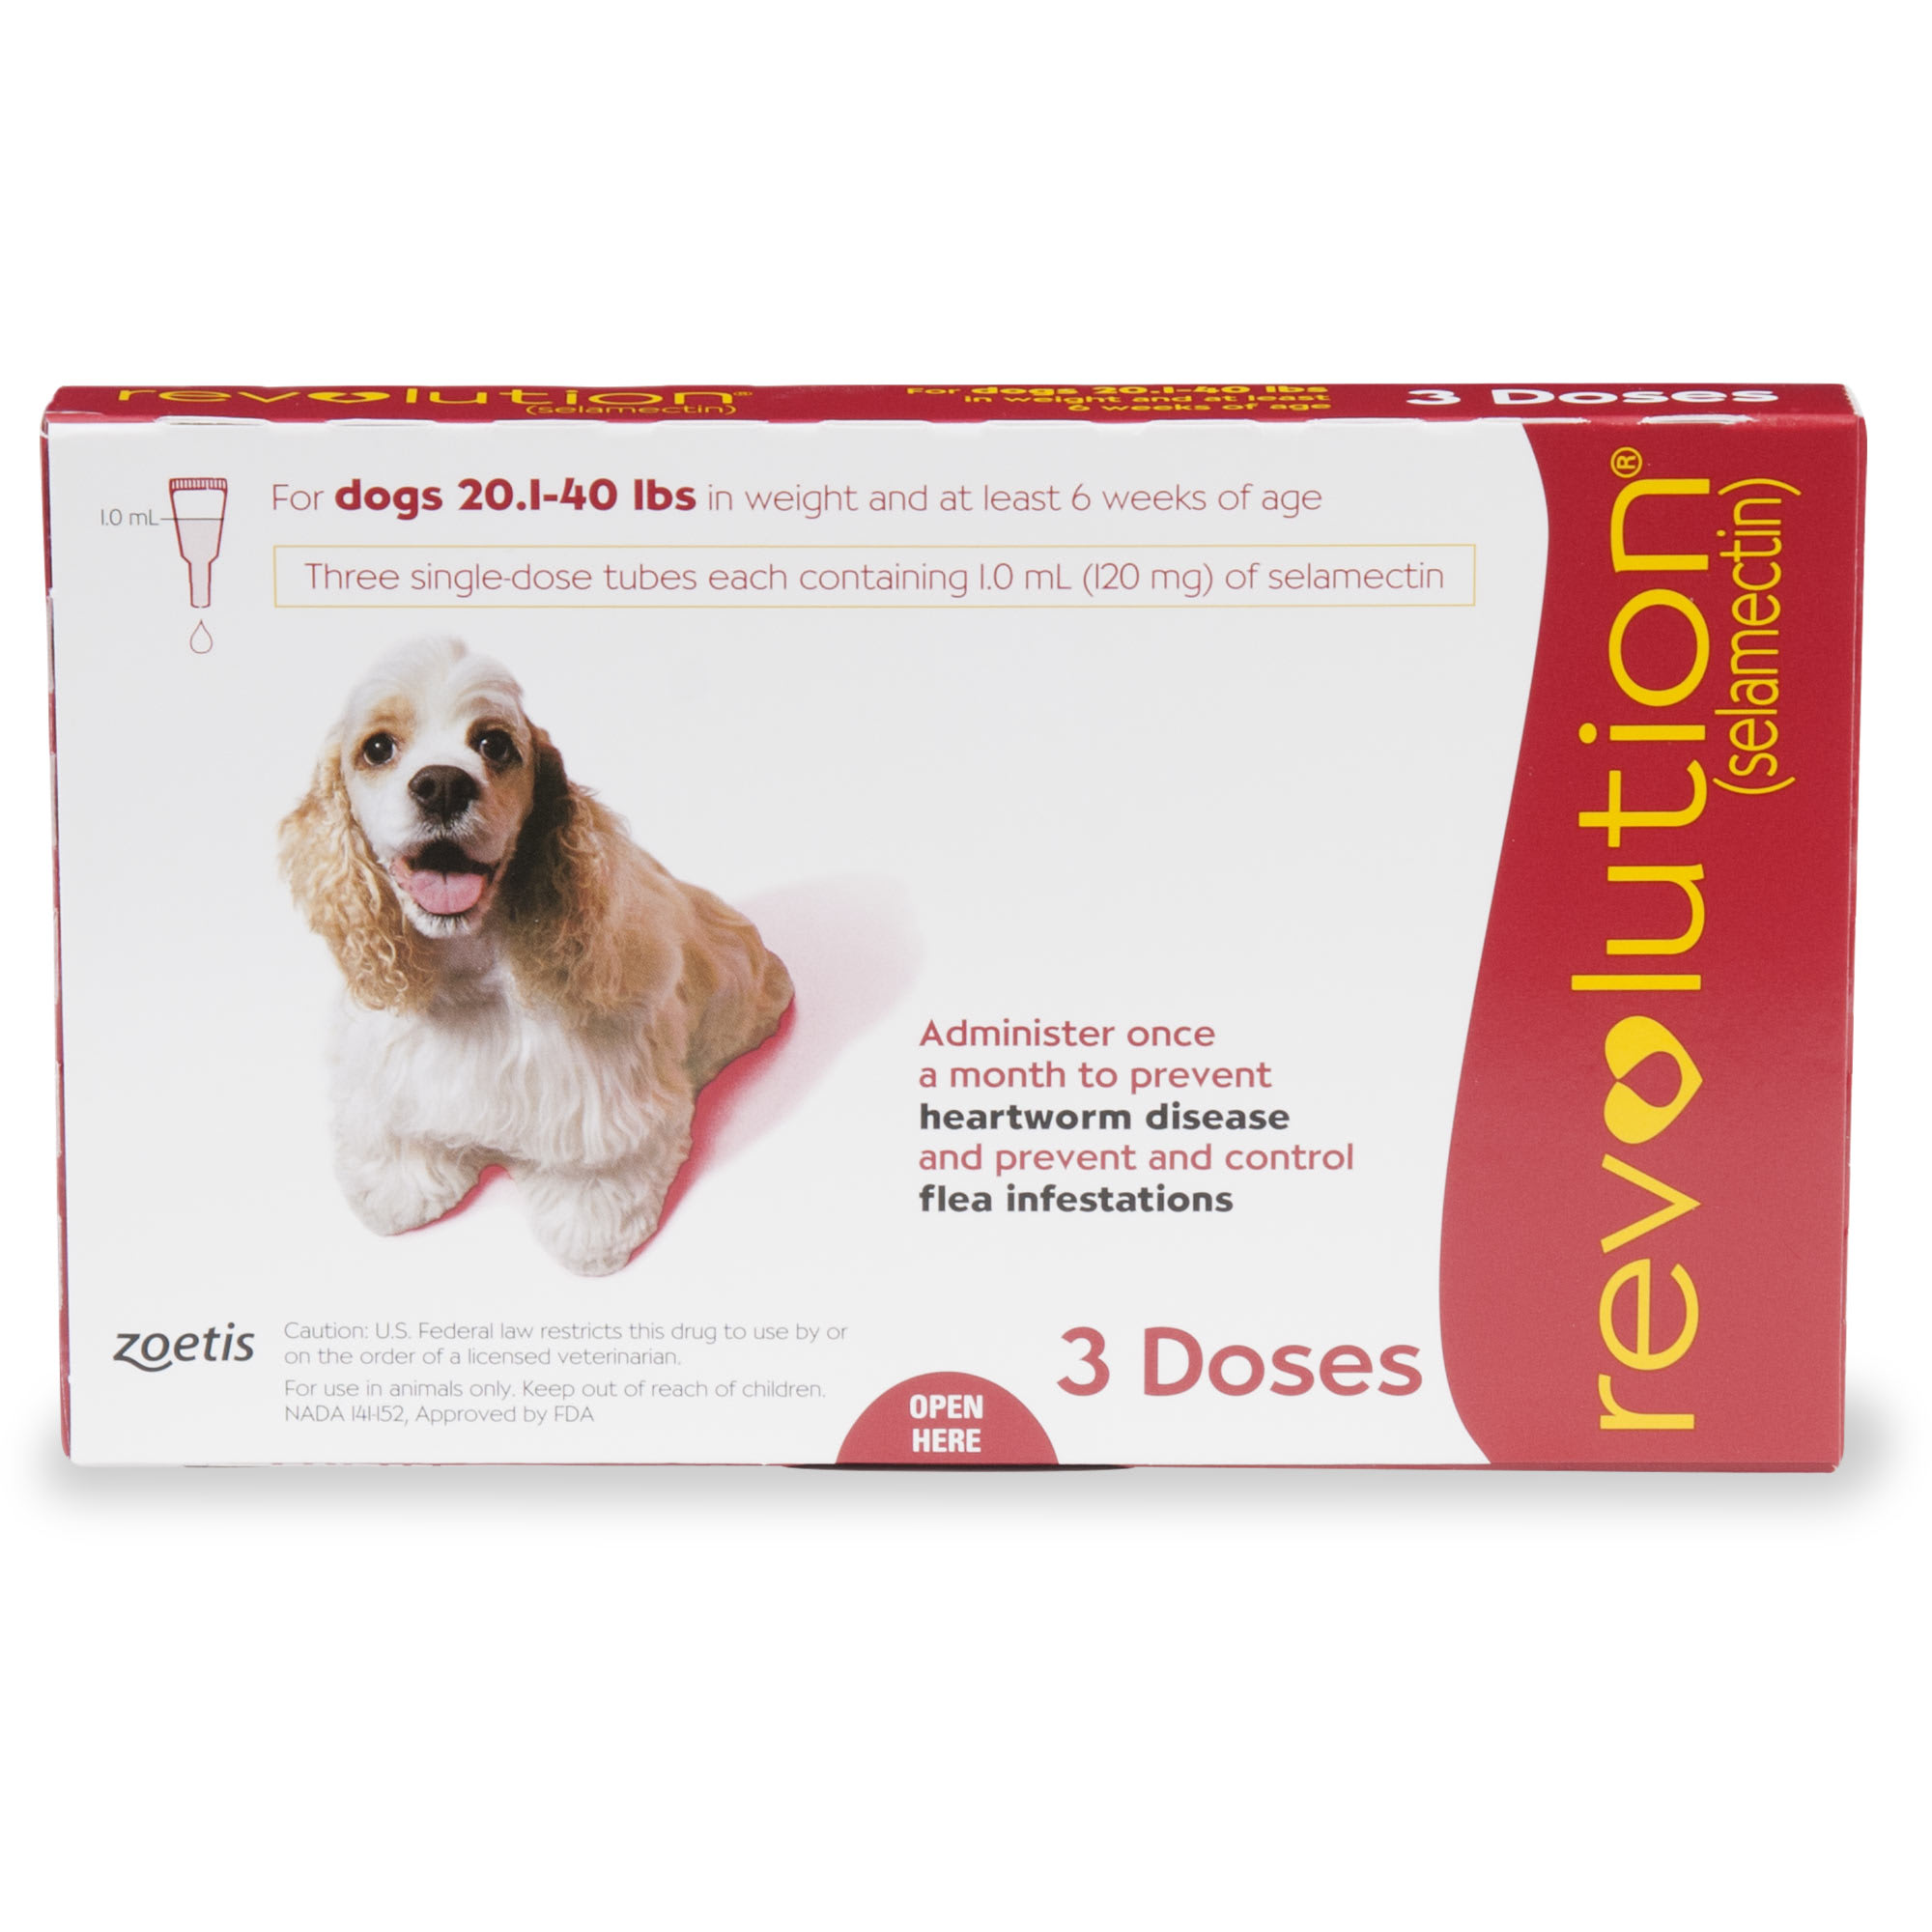 Photos - Dog Medicines & Vitamins Revolution Topical Solution for Dogs 20.1-40 lbs, 3 Month Suppl 